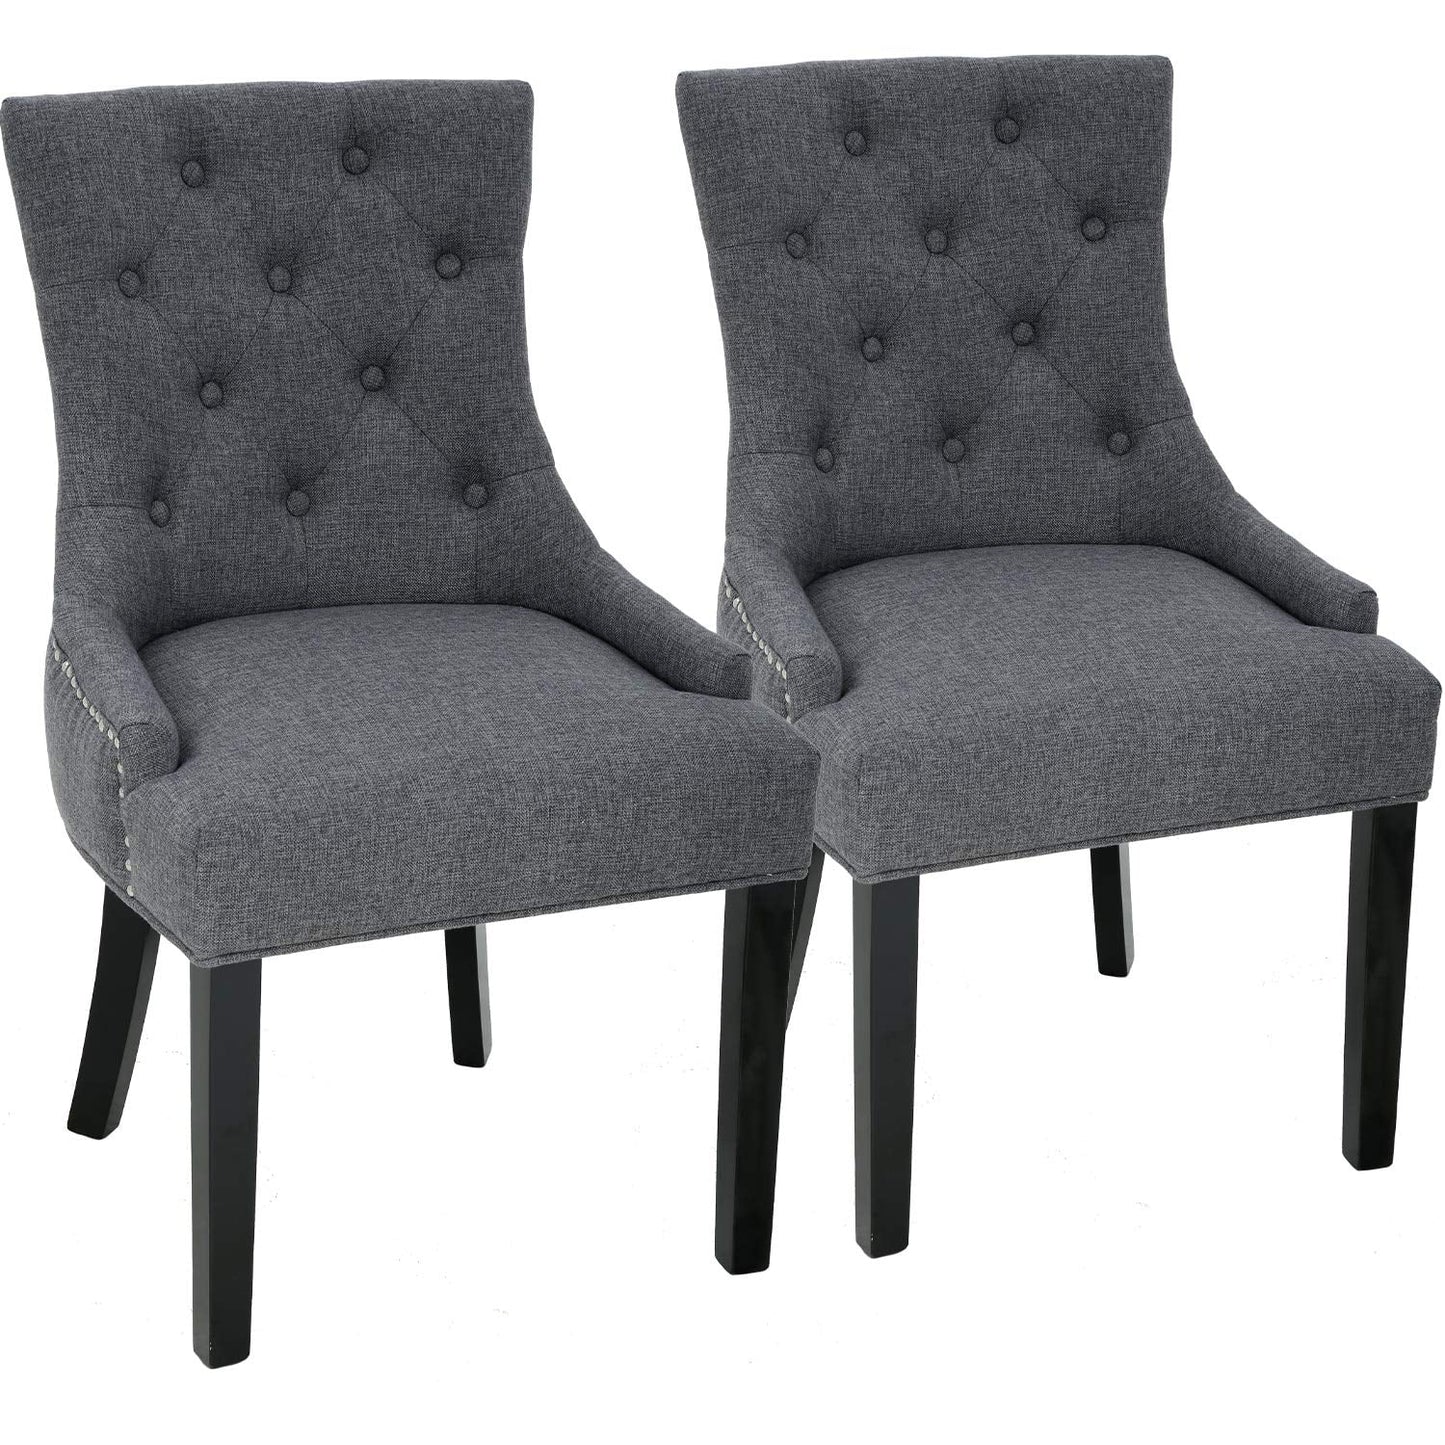 Contemporary Modern Demi Wing Back Dining Chair Set with Nailheads, Grey